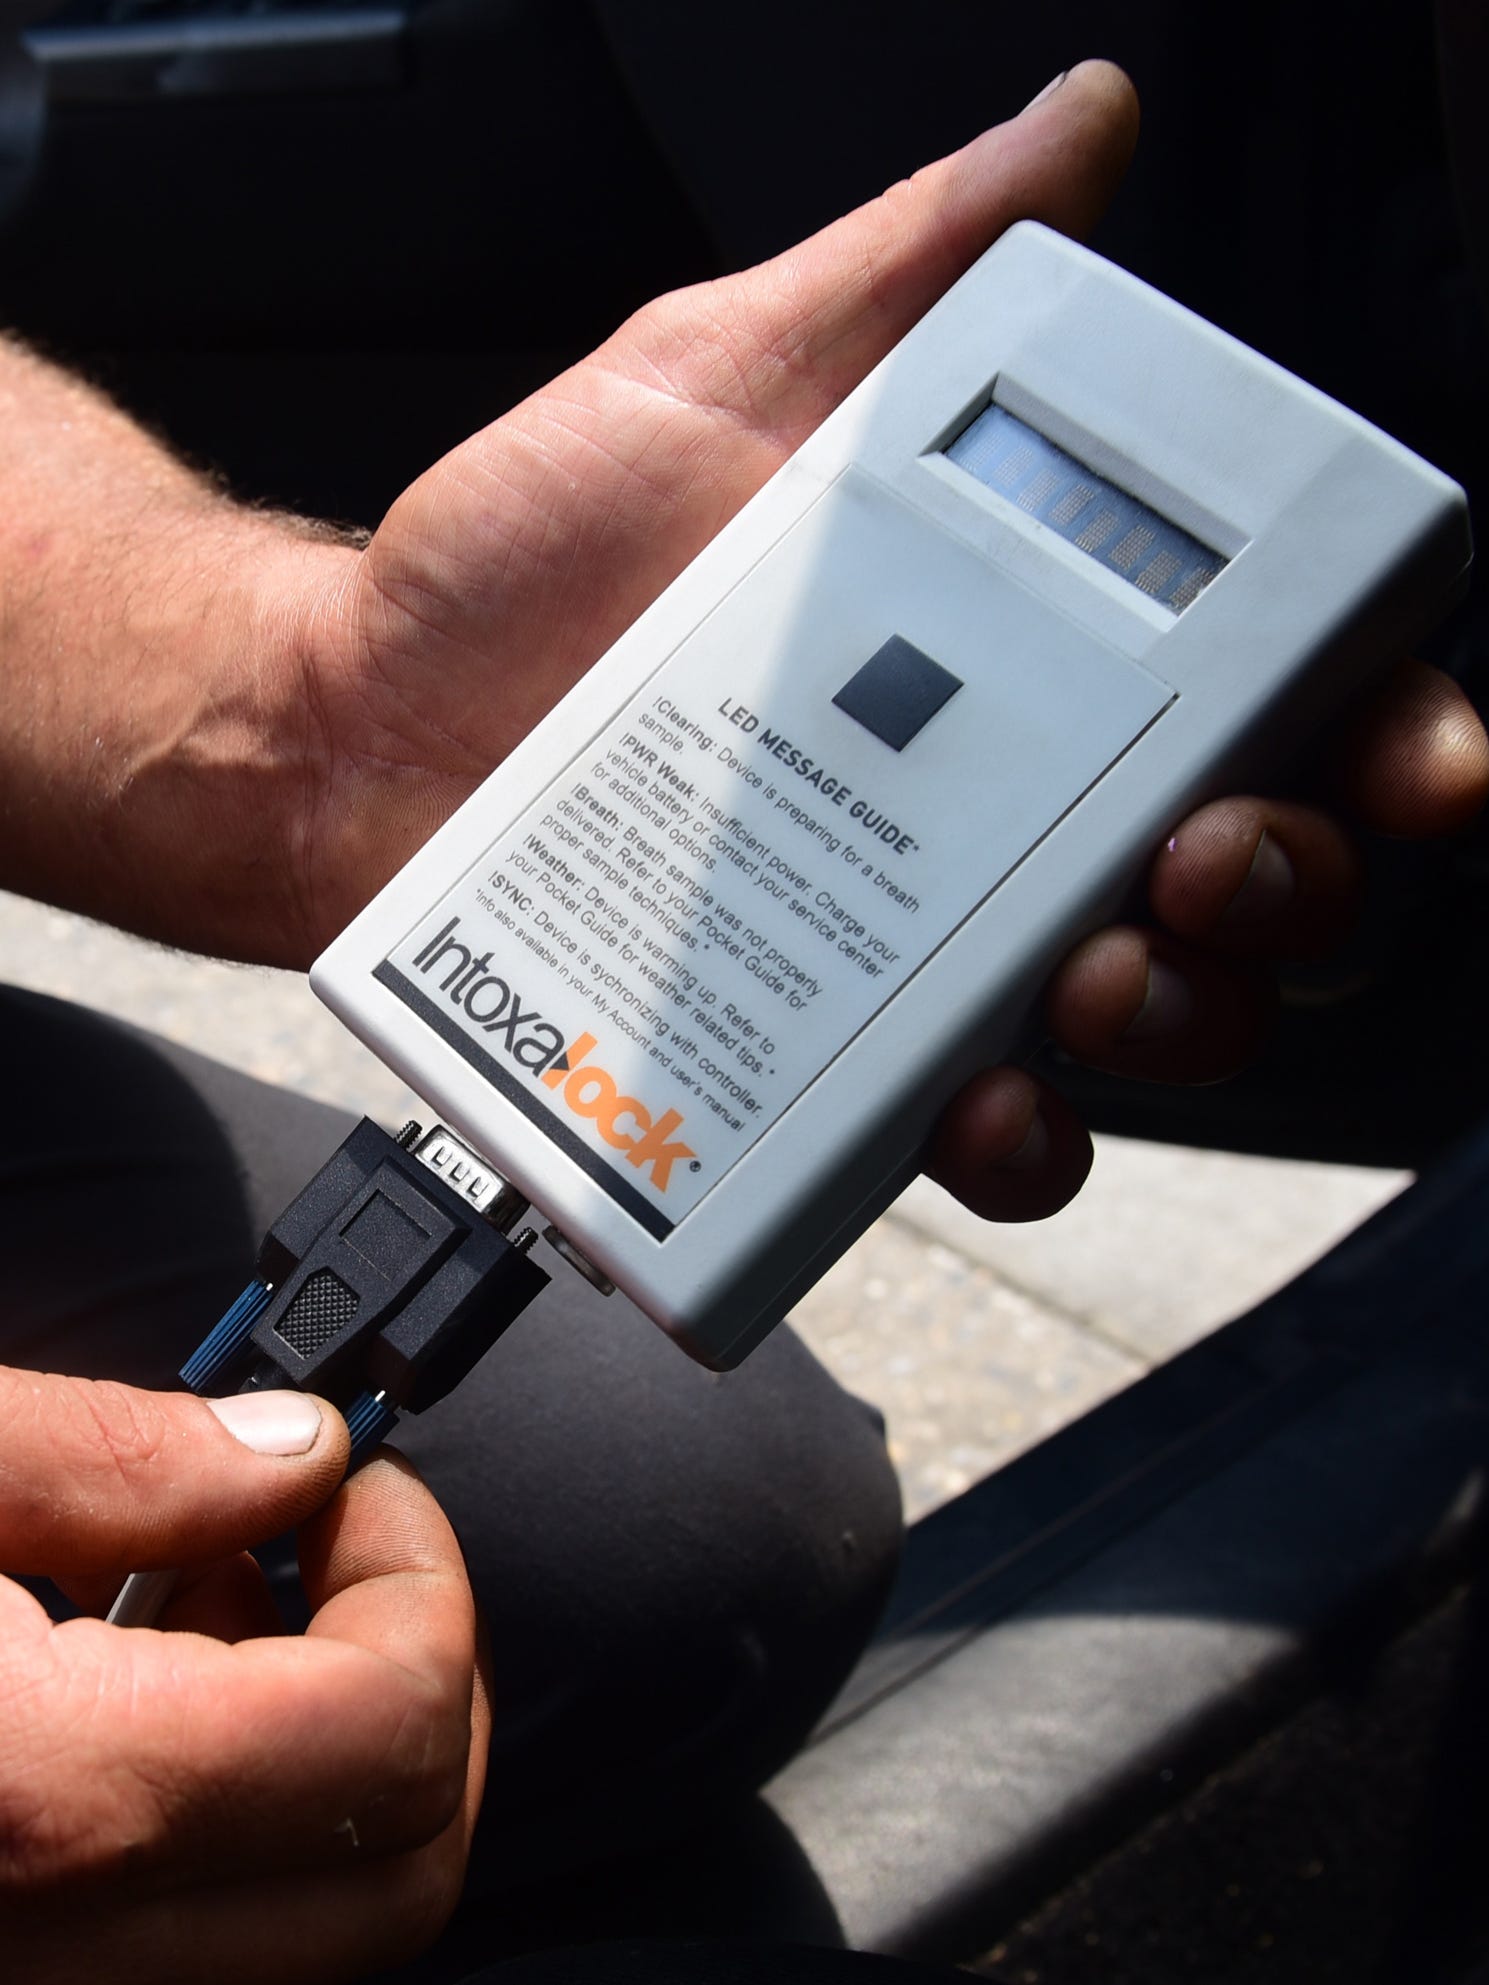 Ignition Interlock Limited License Eligibility Charts